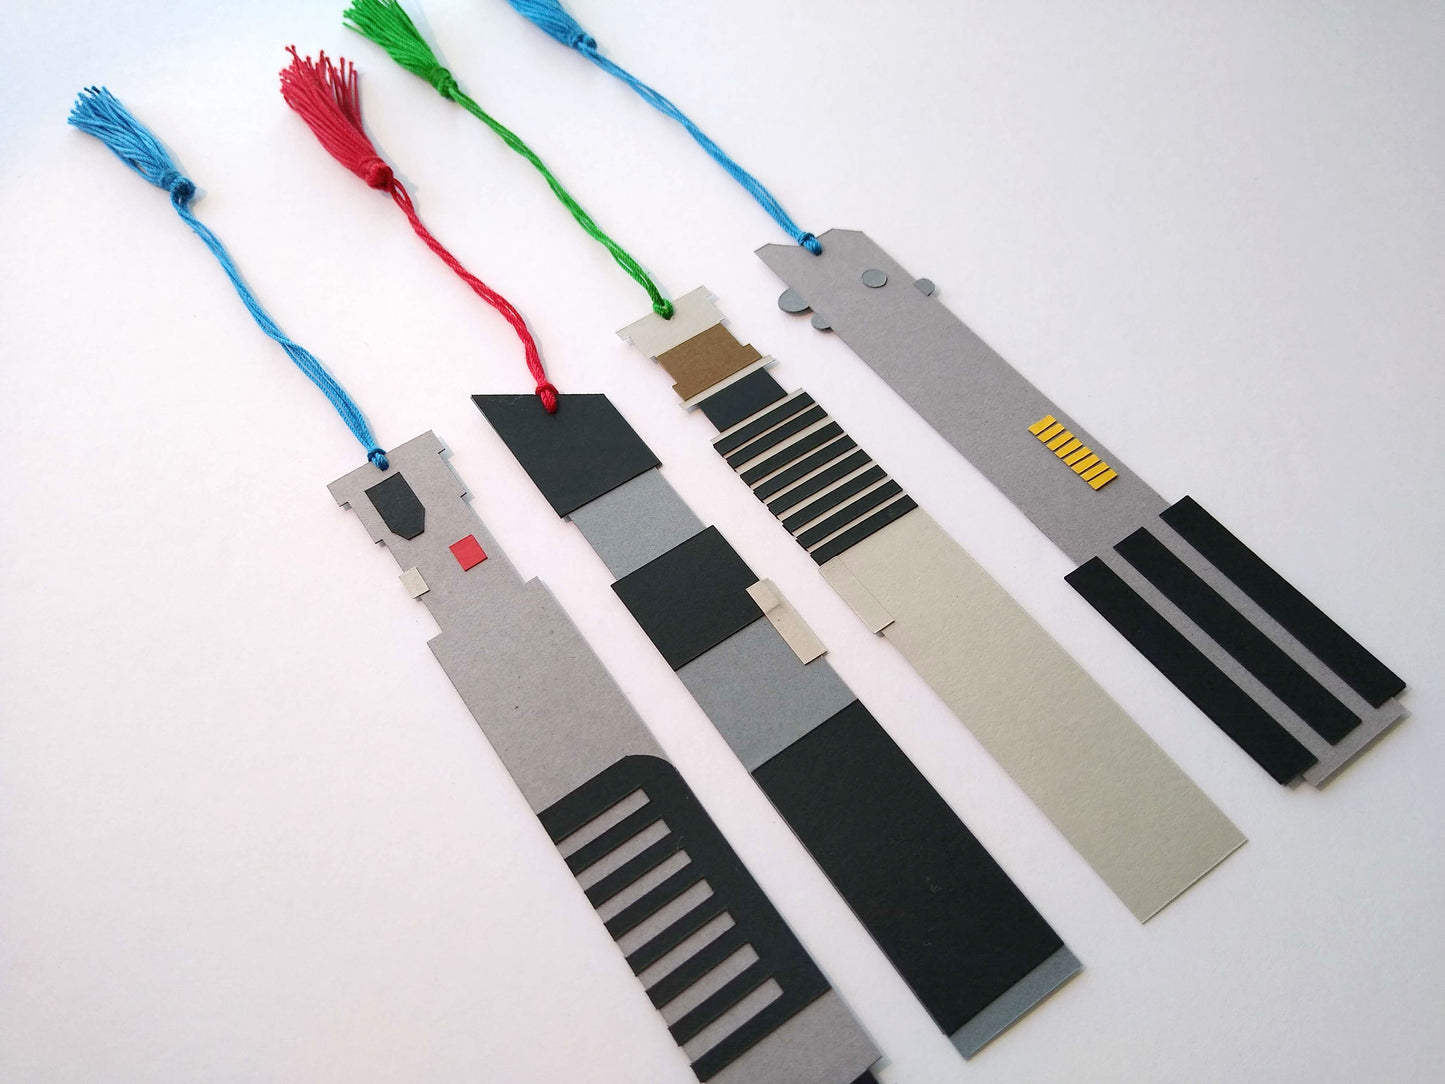 Four bookmarks with tassels stretched out lay on a white background. Each bookmark is designed to look like a light saber from Star Wars, with the light portion represented by a colored tassel.